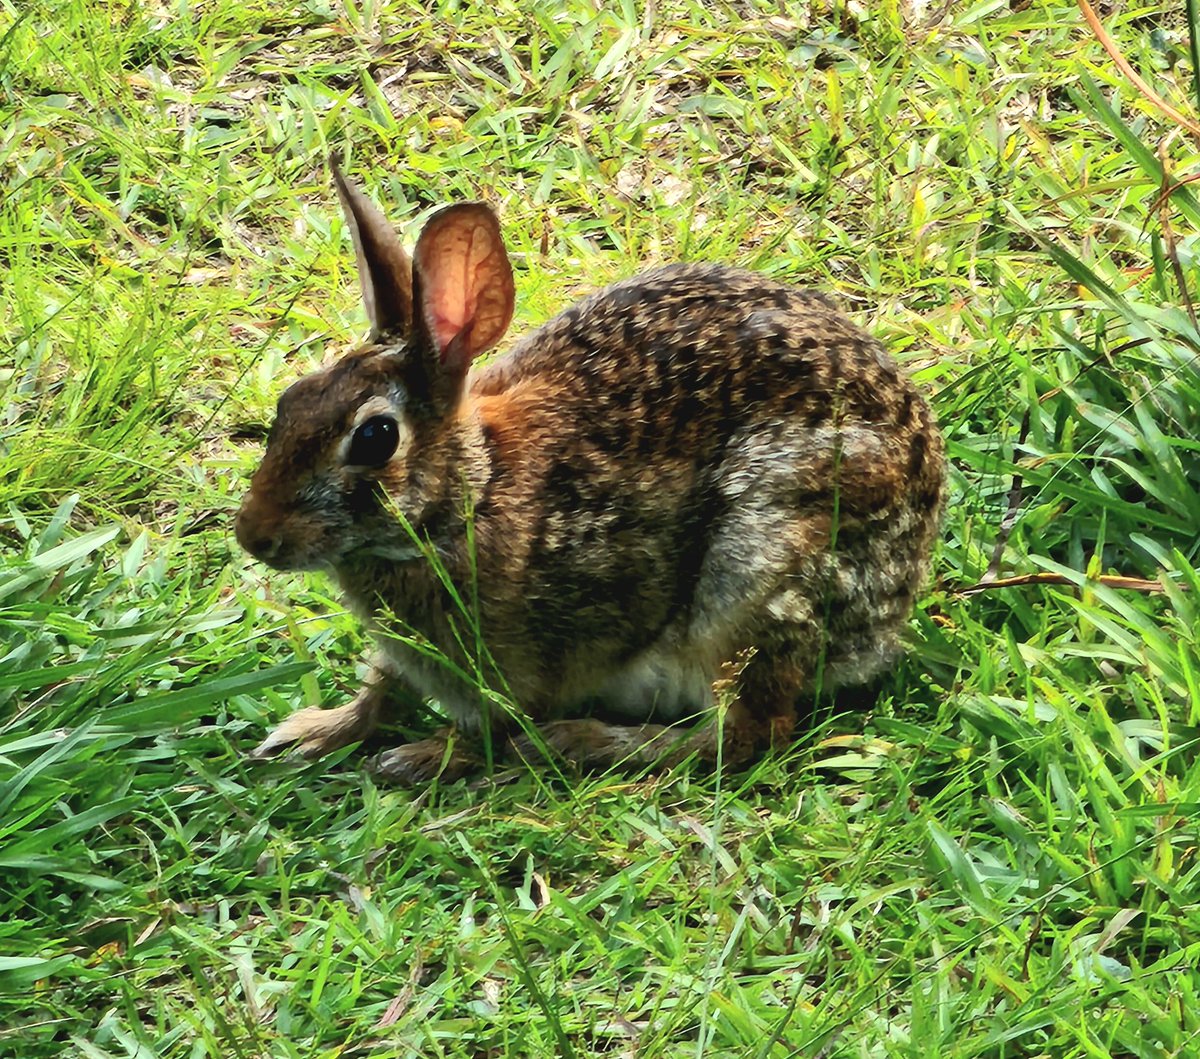 Just a little #BackyardWildlife chilling on an early summer afternoon. 
#bunny #floof Eastern #Cottontail #Rabbit.